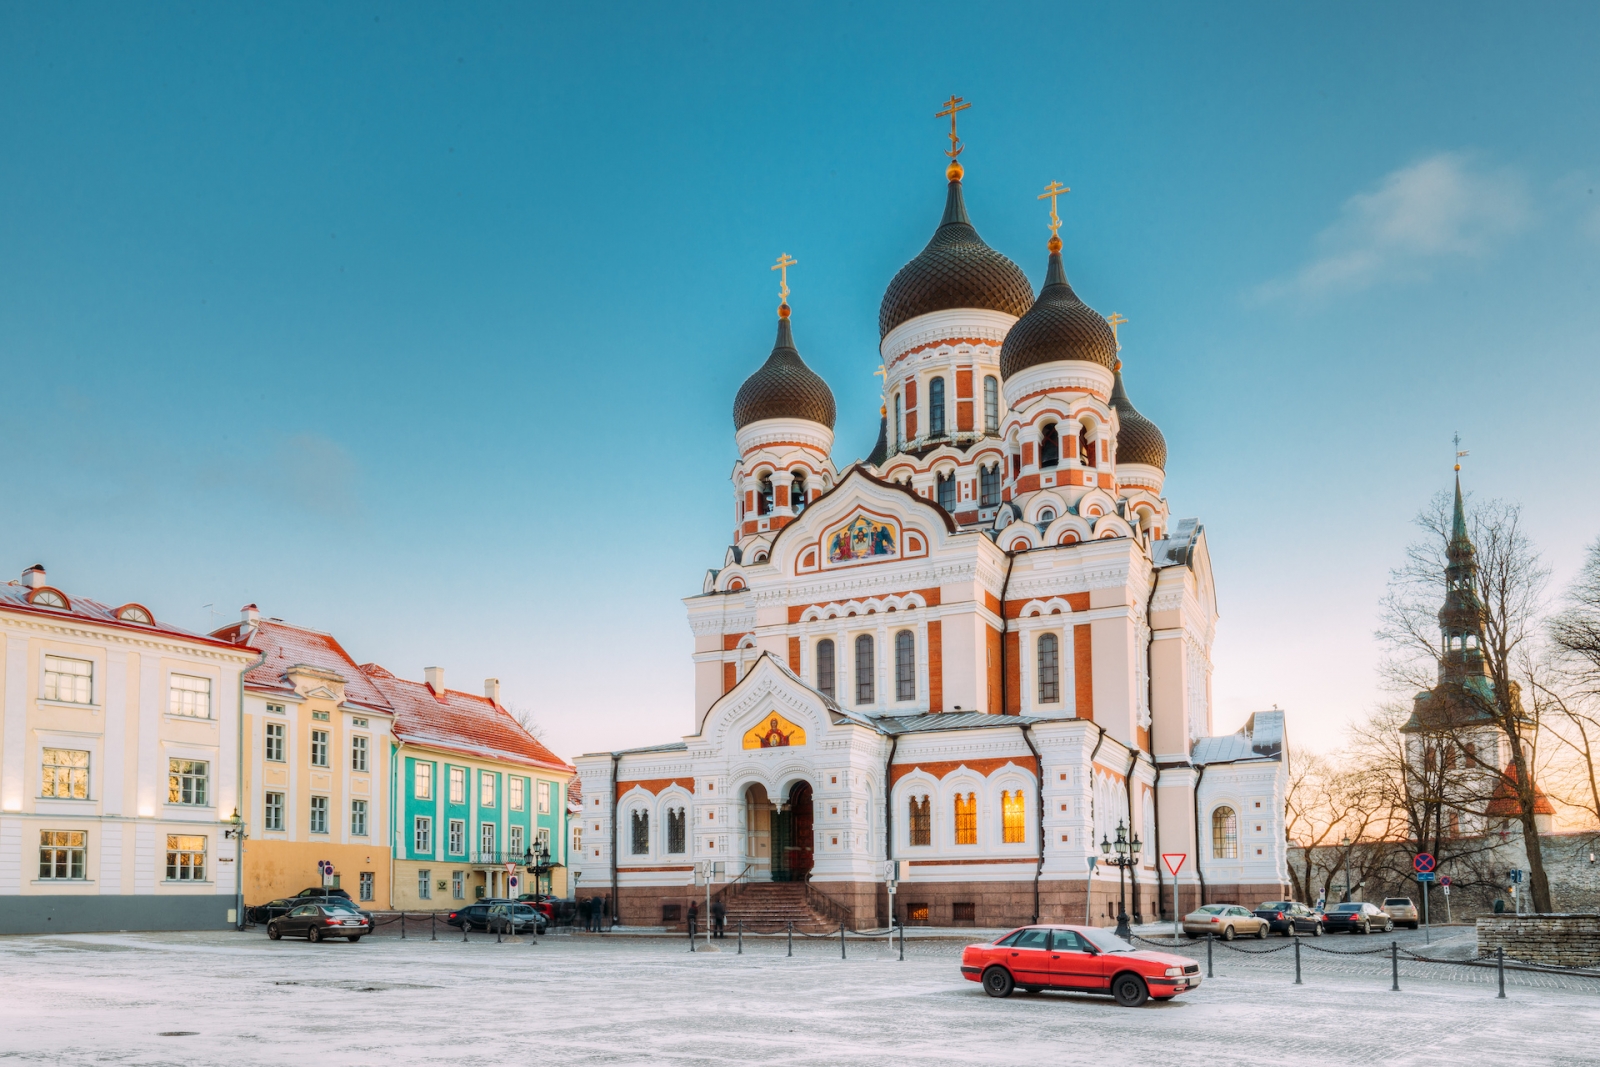 Tallinn, Estonia. Morning View Of Alexander Nevsky Cathedral. Famous Orthodox Cathedral Is Tallinn's Largest And Grandest Orthodox Cupola Cathedral.